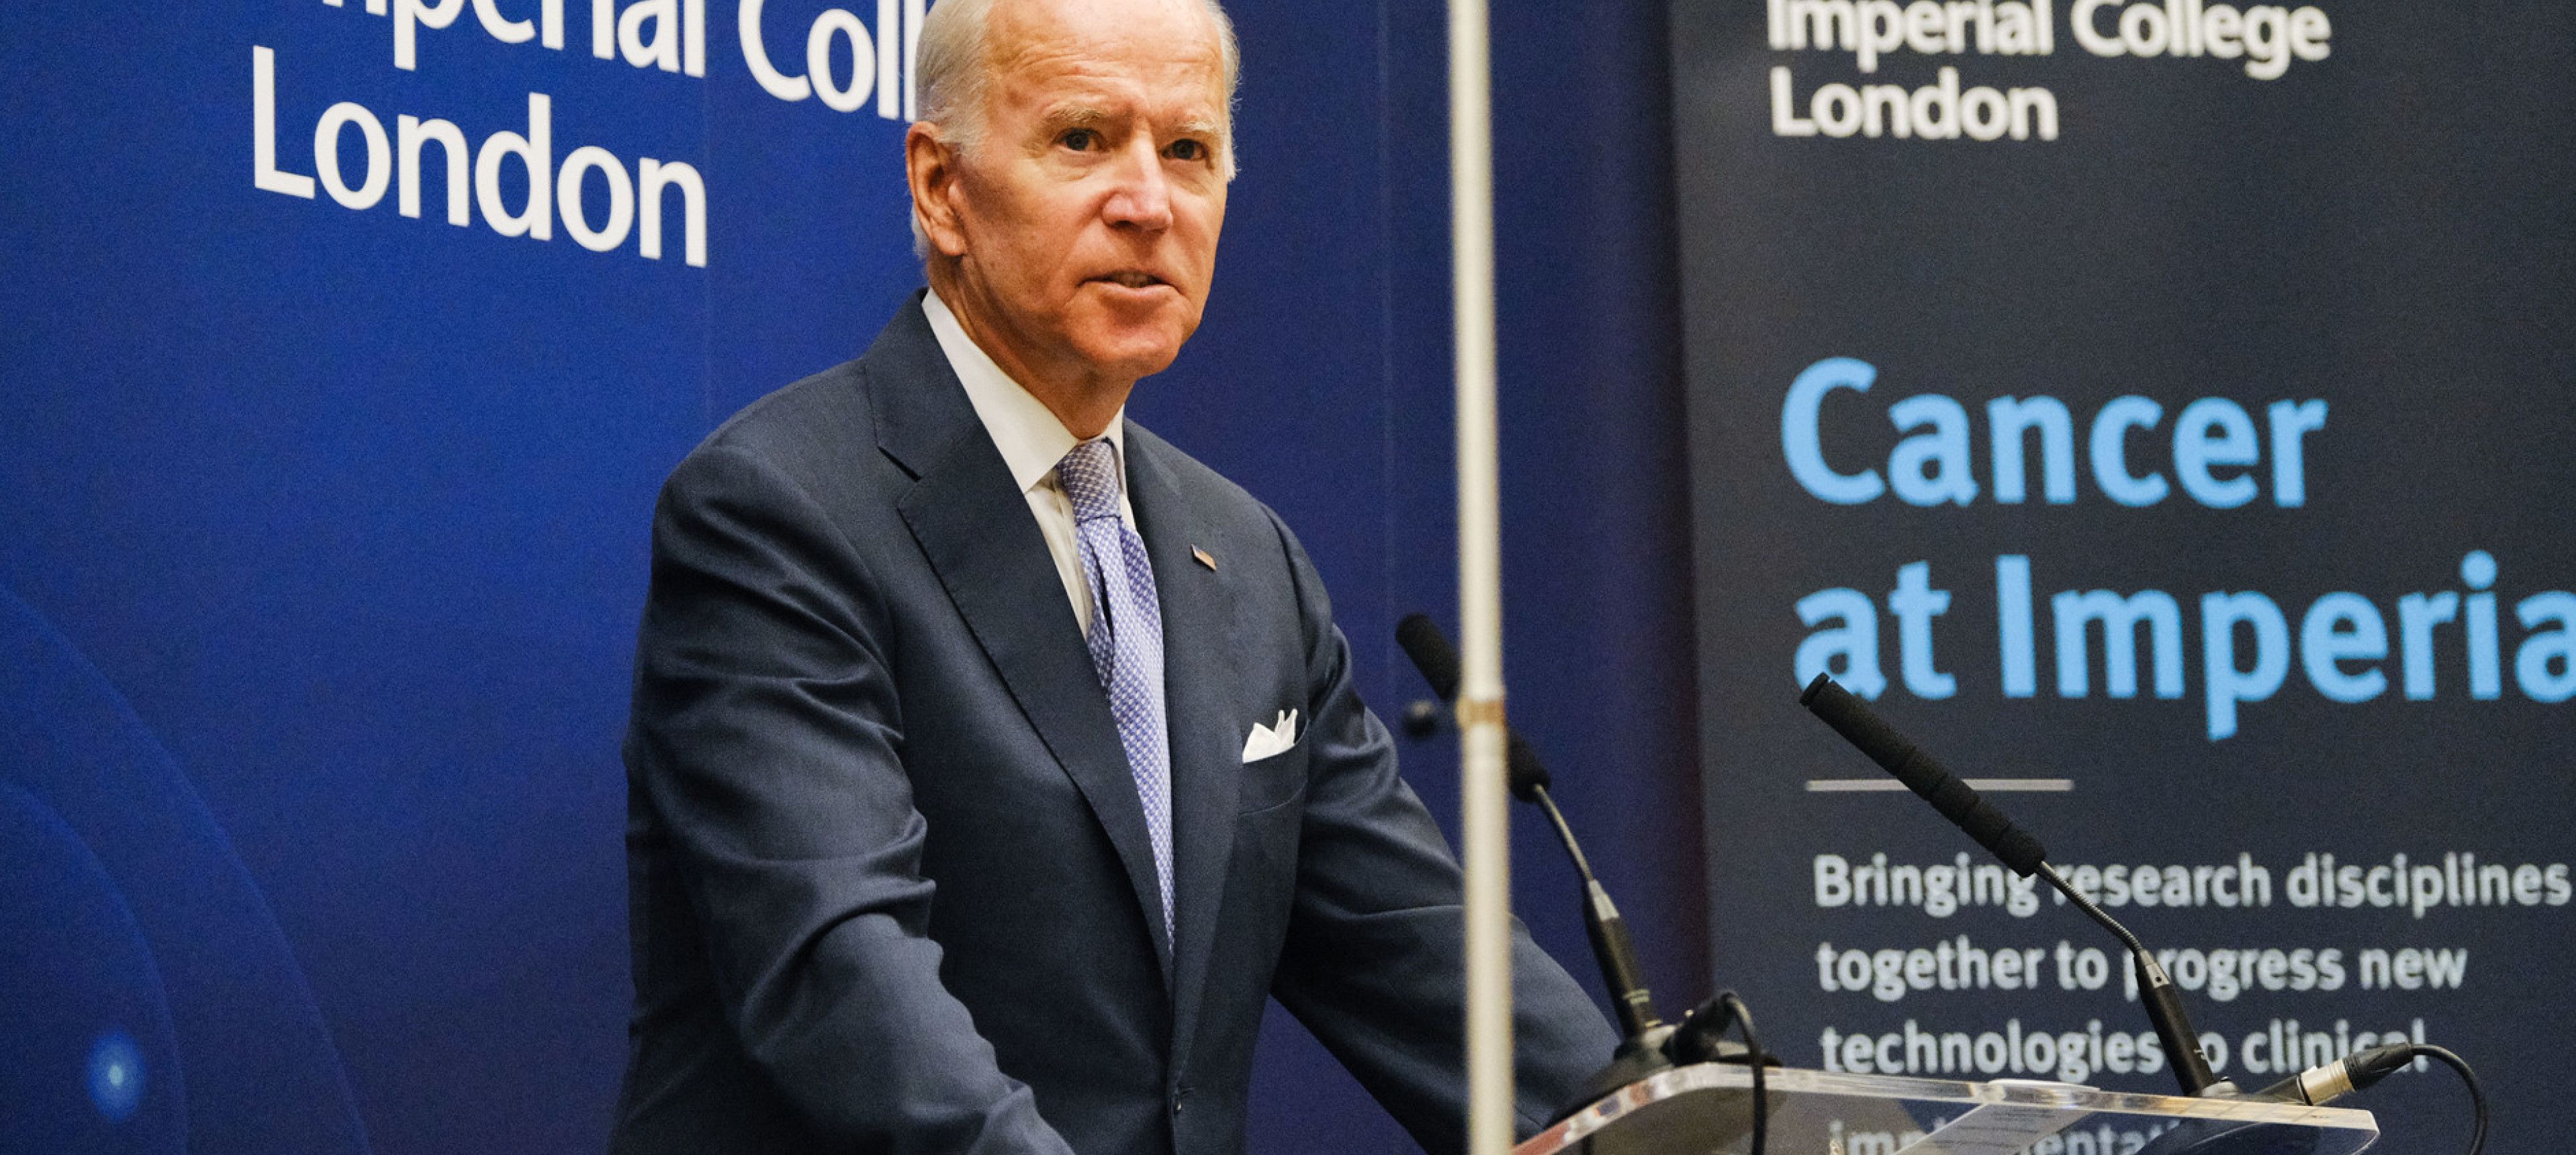 Joe Biden delivering lecture at Imperial College London